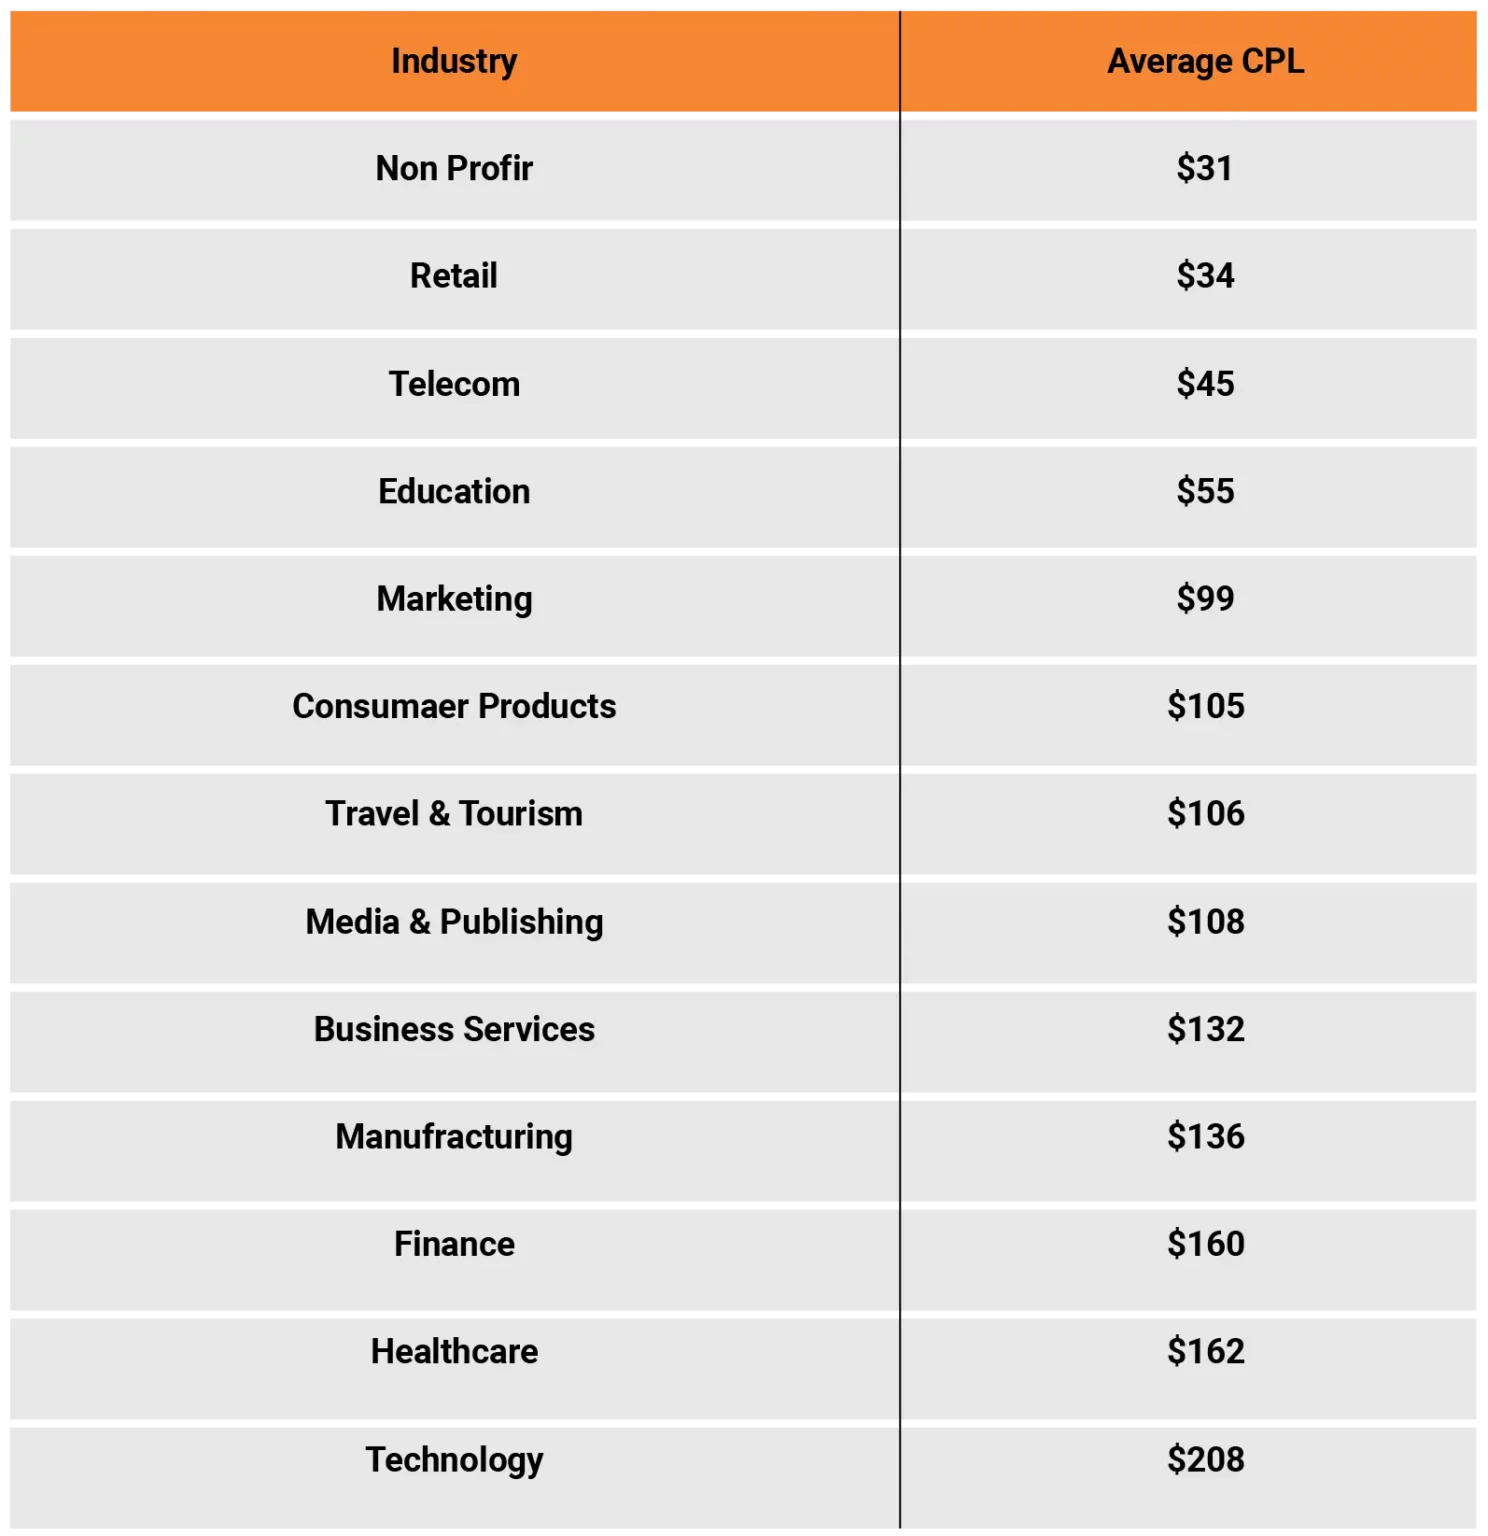 Average Cost per Lead Industry based